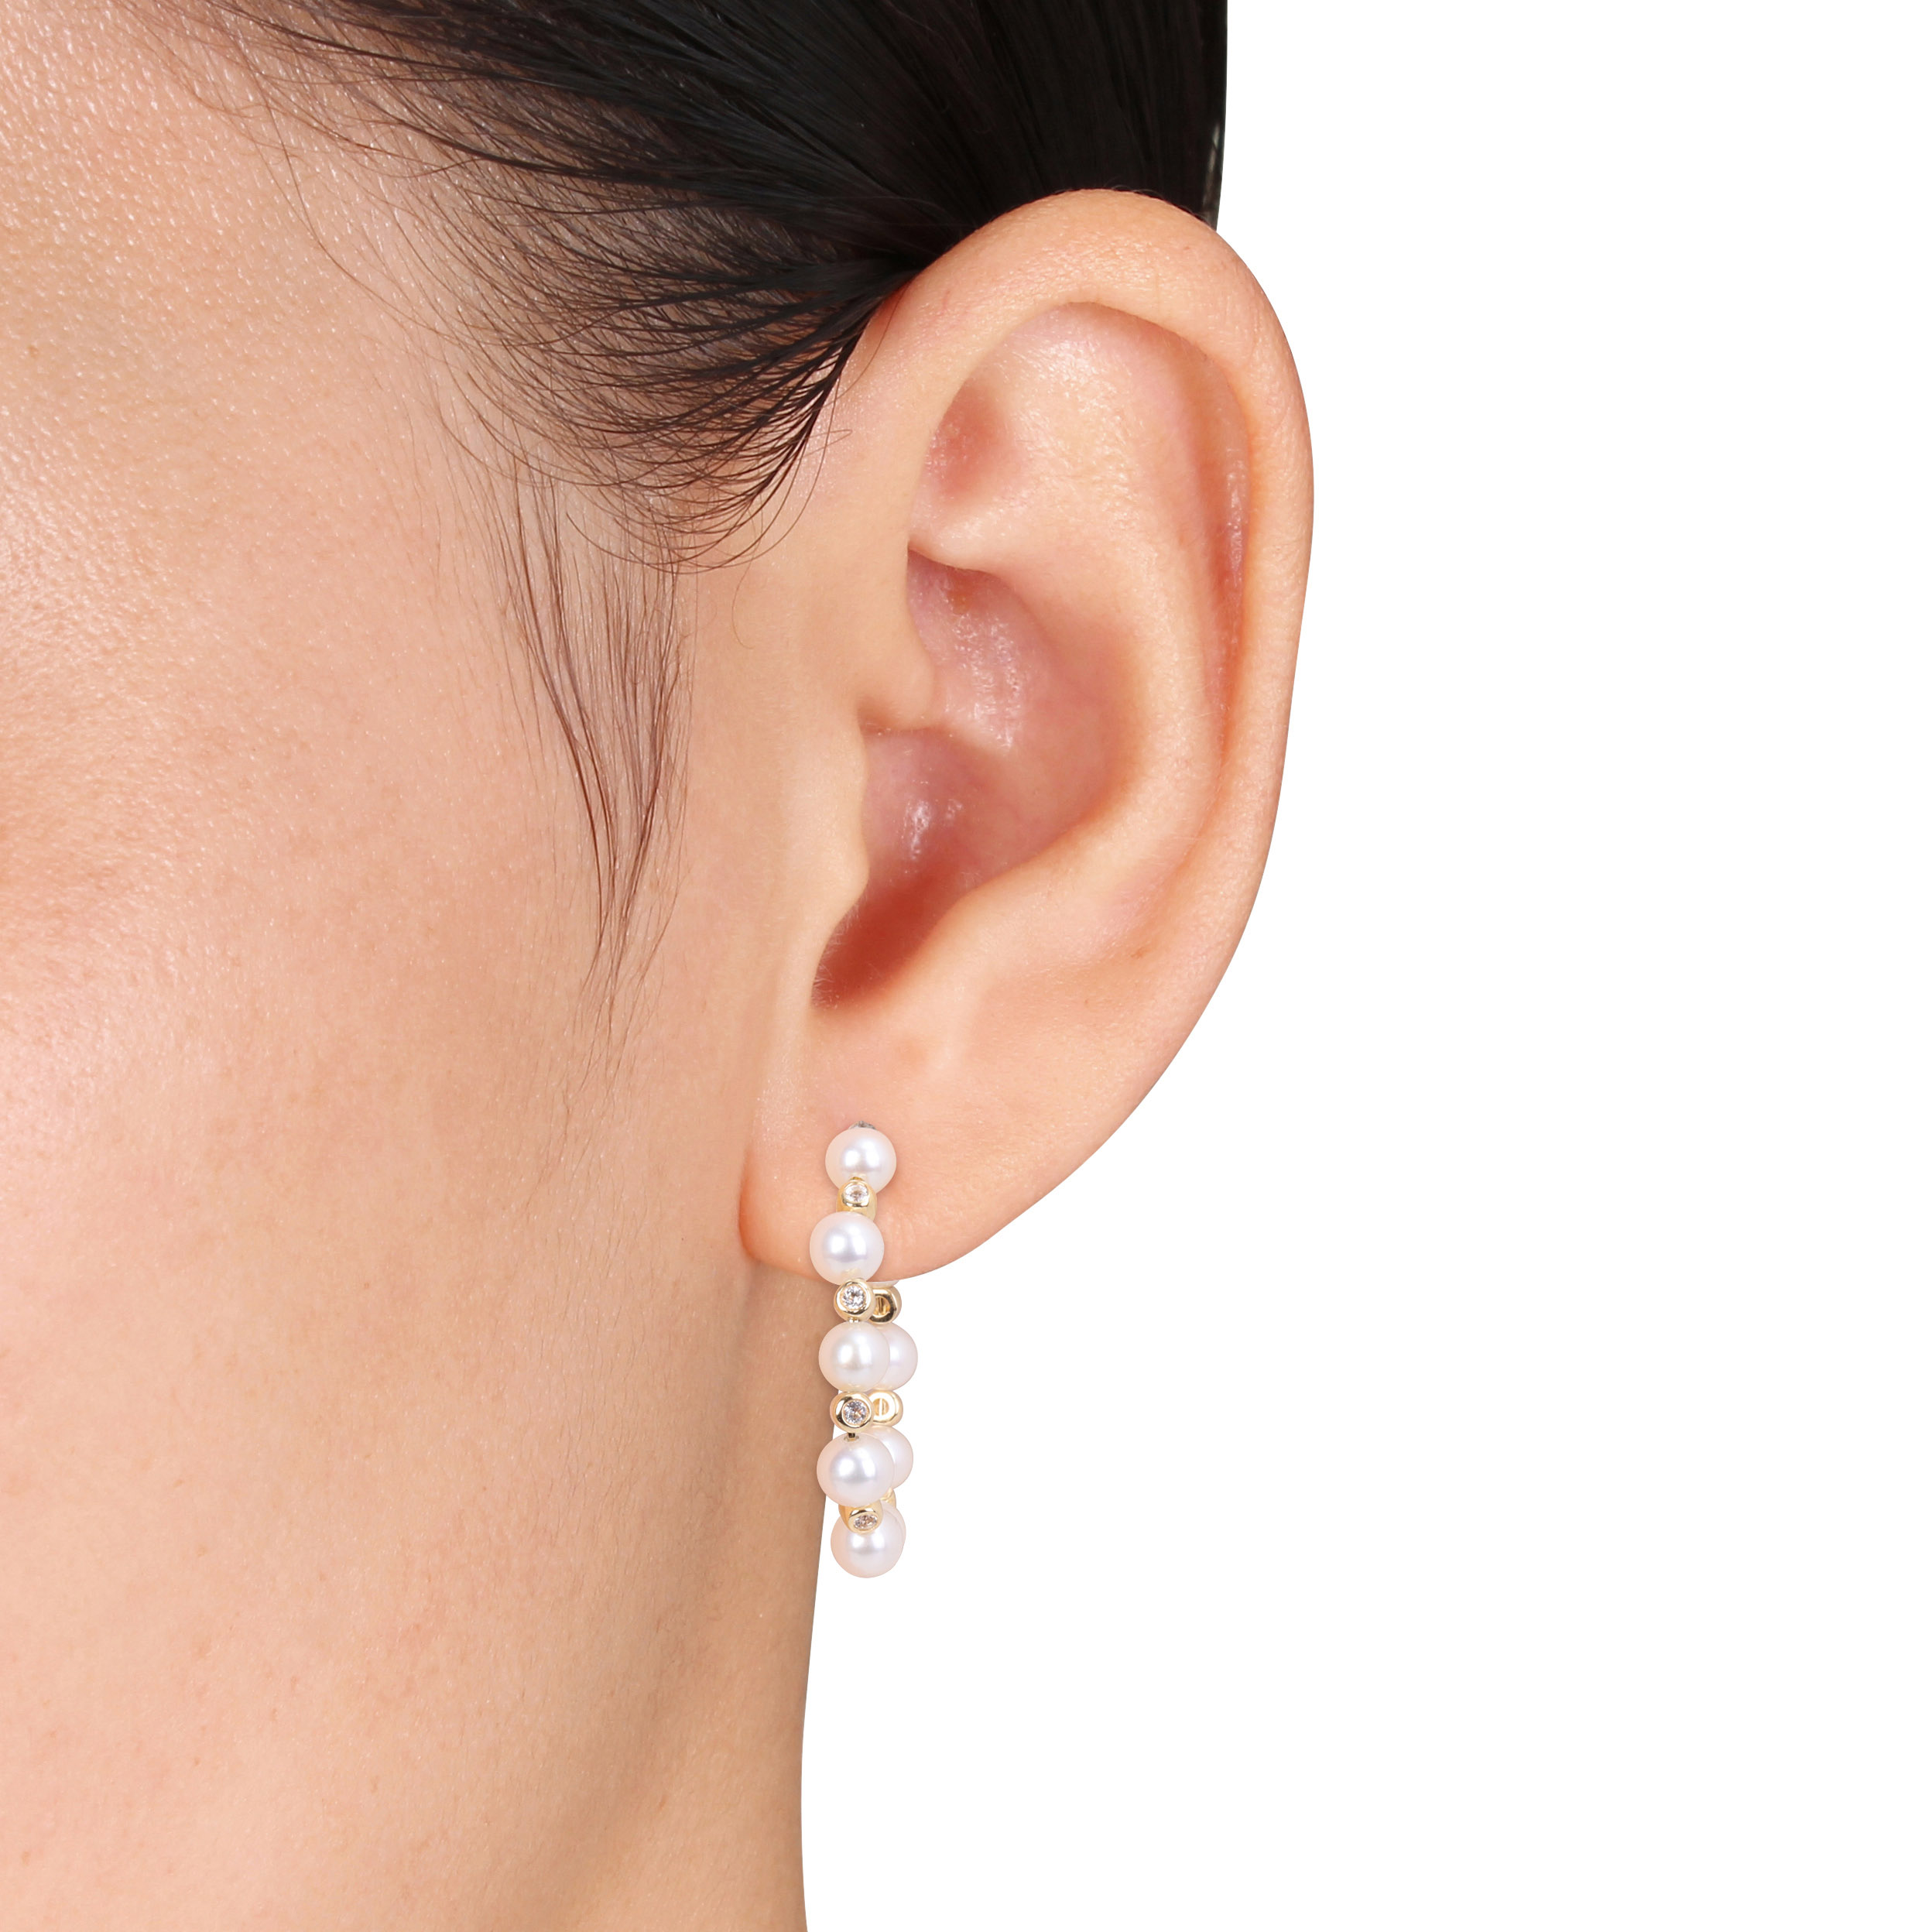 4.5-5 MM Freshwater Cultured Pearl and 1/2 CT TGW White Topaz Beaded Hoop Earrings in Yellow Plated Sterling Silver